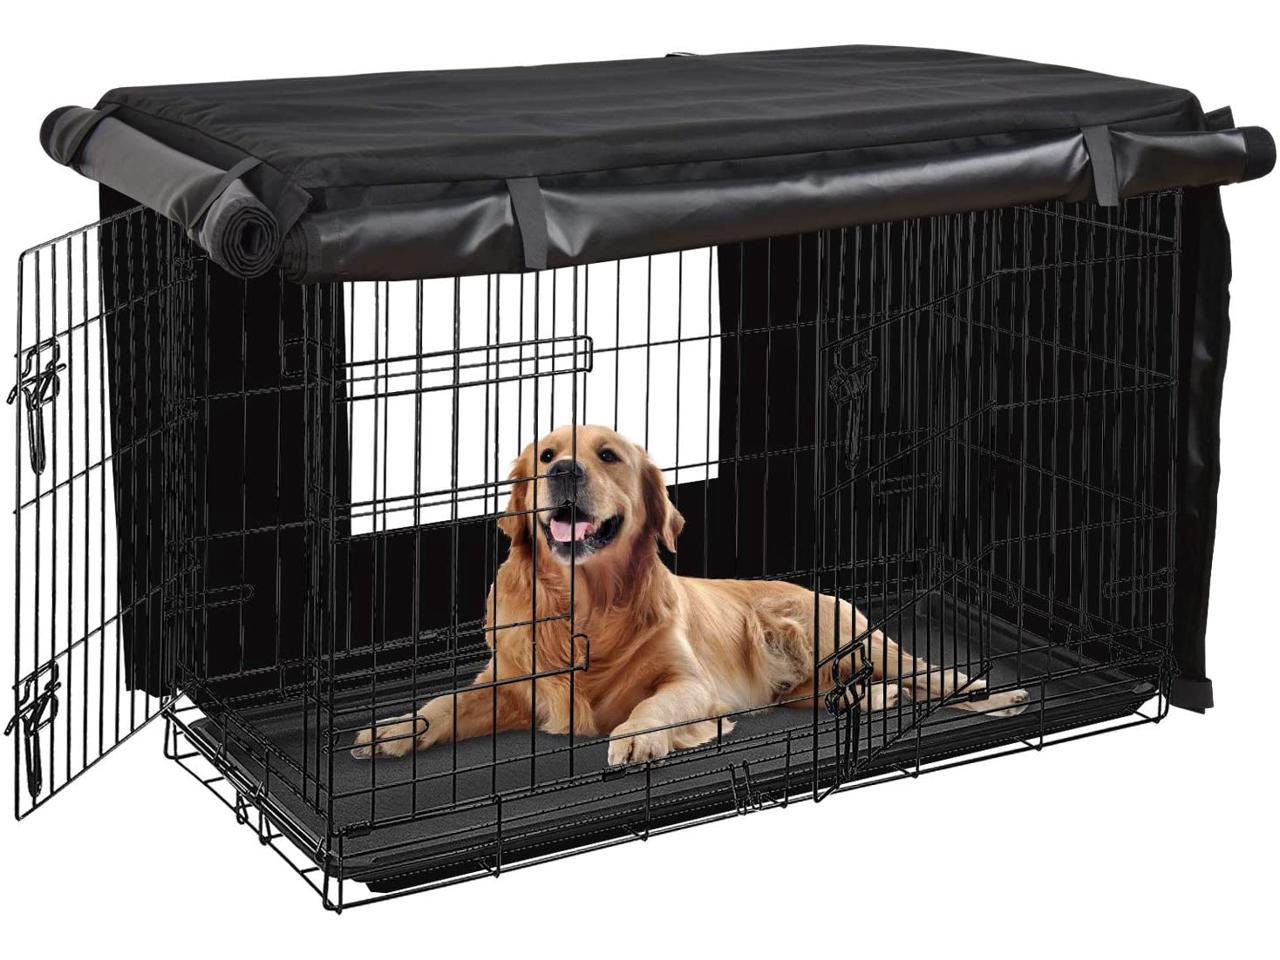 HONEST OUTFITTERS Dog Crate Cover 42 Inch Dog Kennel Cover for Large Dog, Heavy Duty Oxford